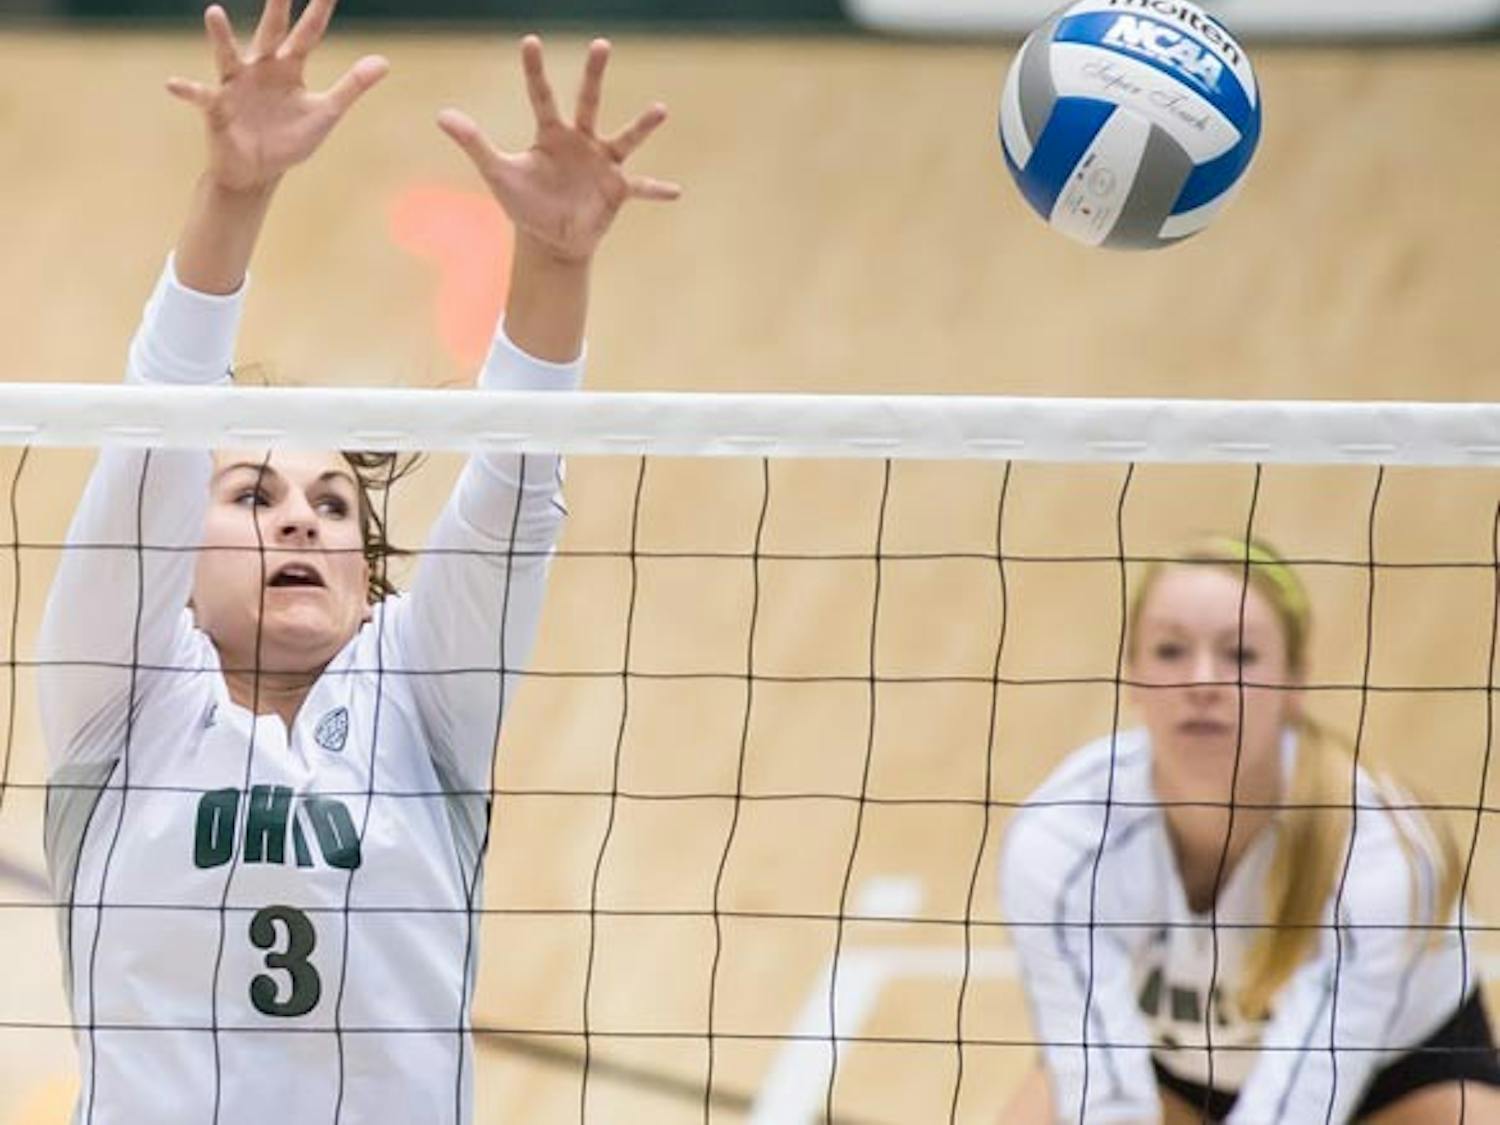 Volleyball: Ohio ranked No. 27 after Oregon upset  